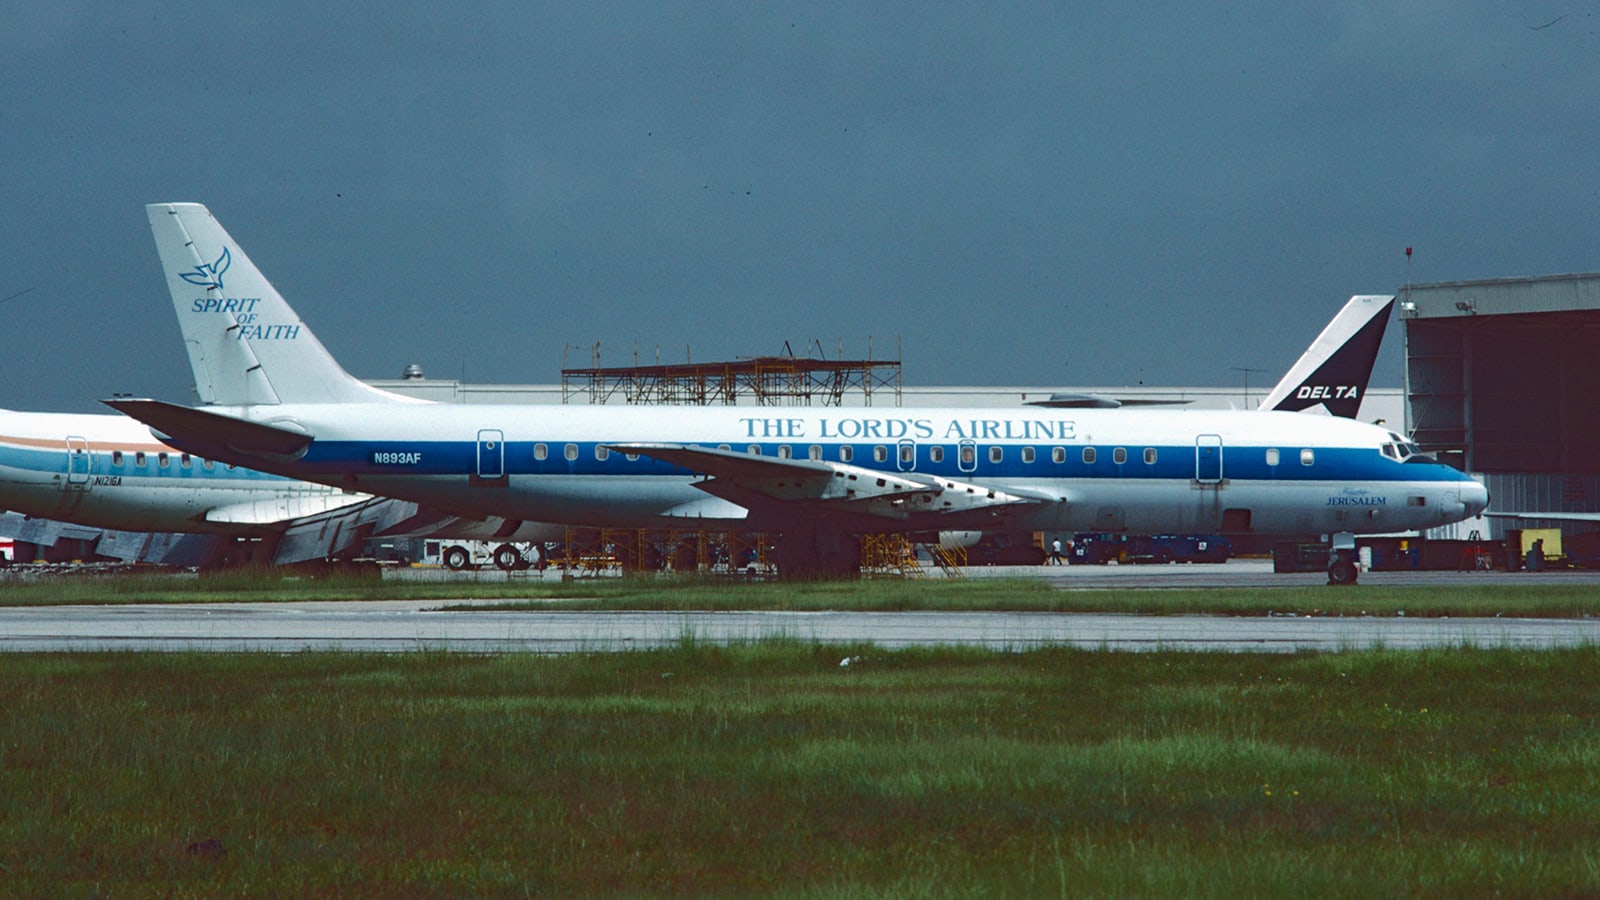 Here is a list of 5 foreign airlines that have existed in the past